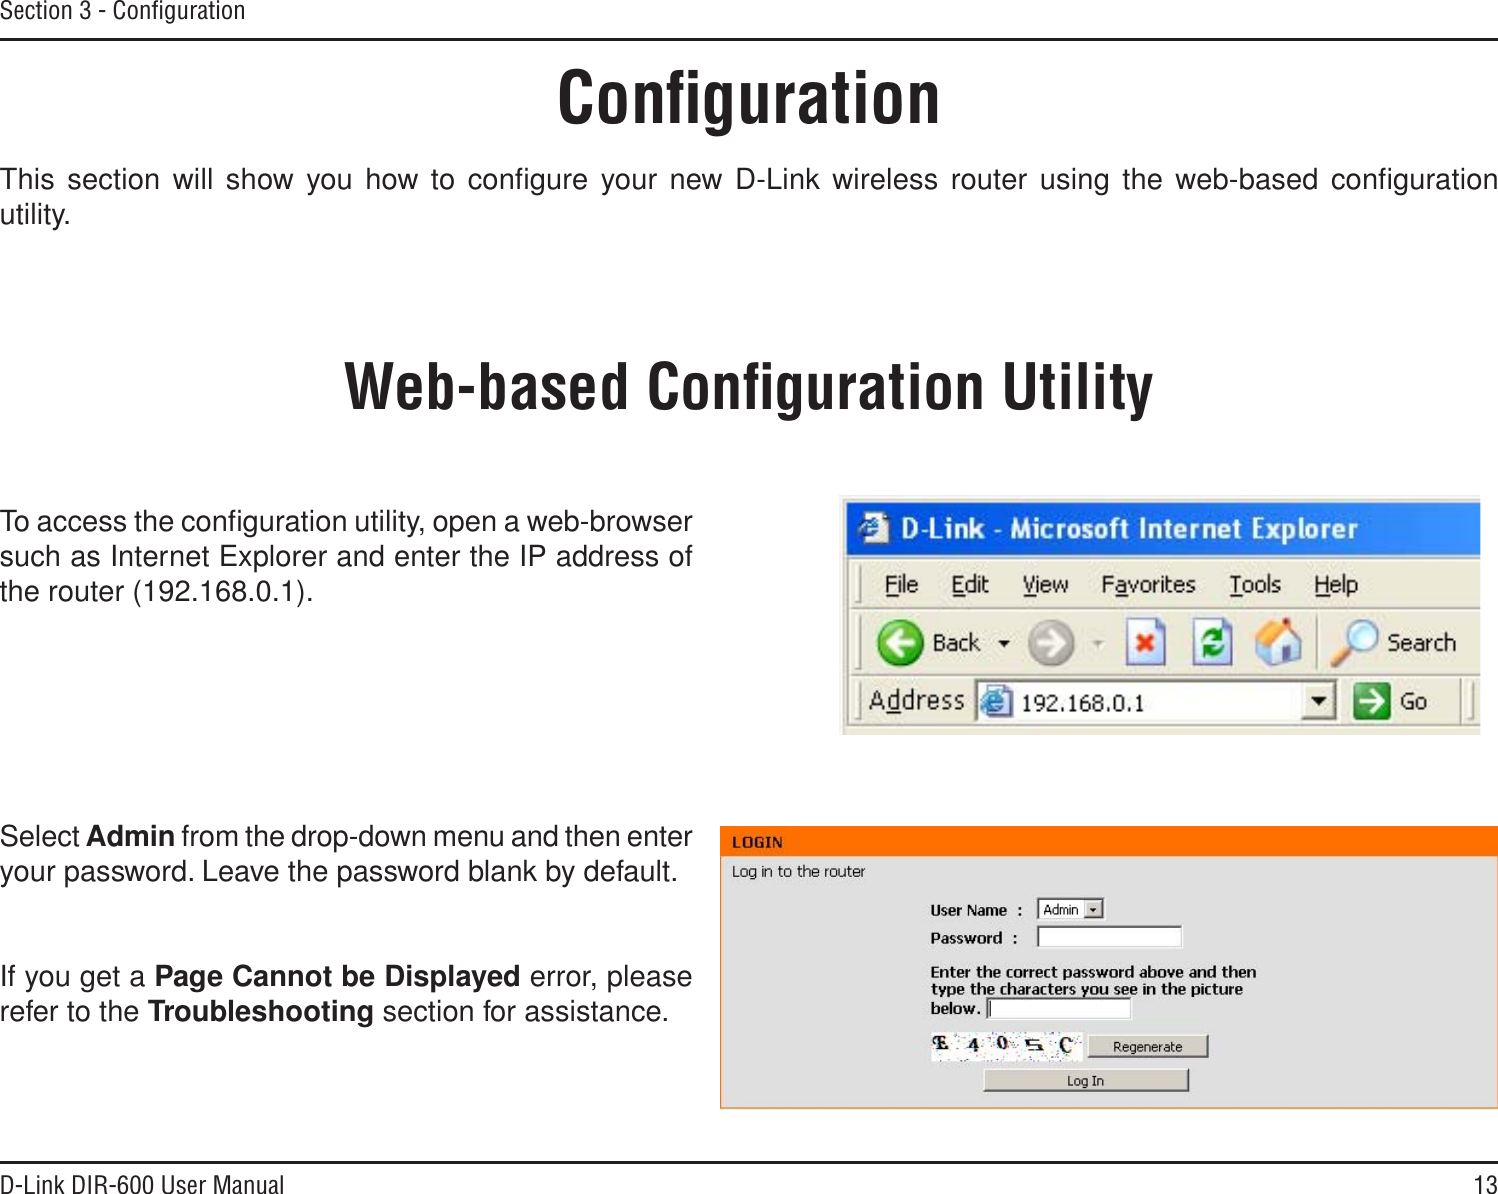 13D-Link DIR-600 User ManualSection 3 - ConﬁgurationConﬁgurationThis section will show you how to conﬁgure your new D-Link wireless router using the web-based conﬁguration utility.Web-based Conﬁguration UtilityTo access the conﬁguration utility, open a web-browser such as Internet Explorer and enter the IP address of the router (192.168.0.1).Select Admin from the drop-down menu and then enter your password. Leave the password blank by default.If you get a Page Cannot be Displayed error, please refer to the Troubleshooting section for assistance.